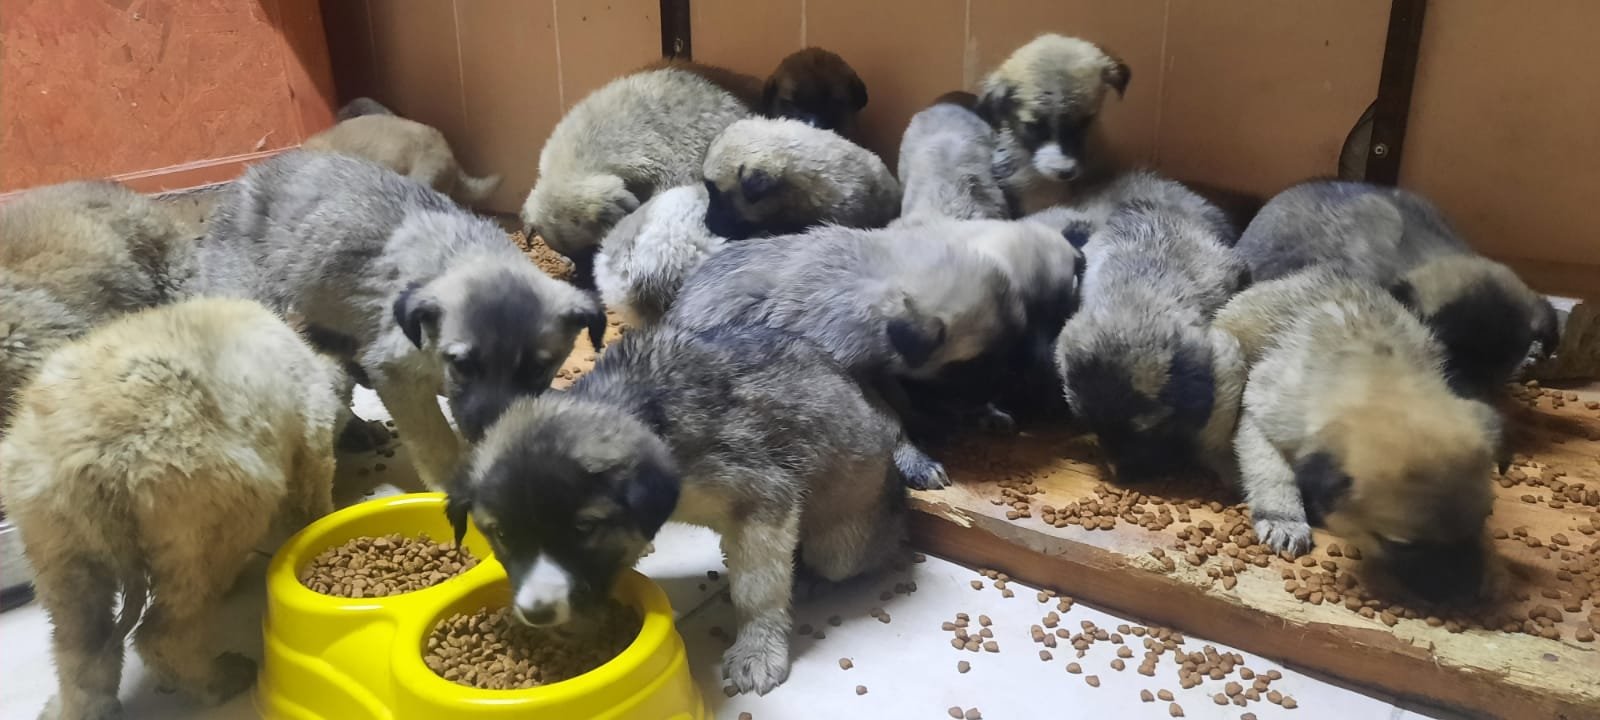 Puppies picked by municipality crews eat inside a shelter, in Erzurum, eastern Turkey, Jan. 27, 2022. (DHA Photo)